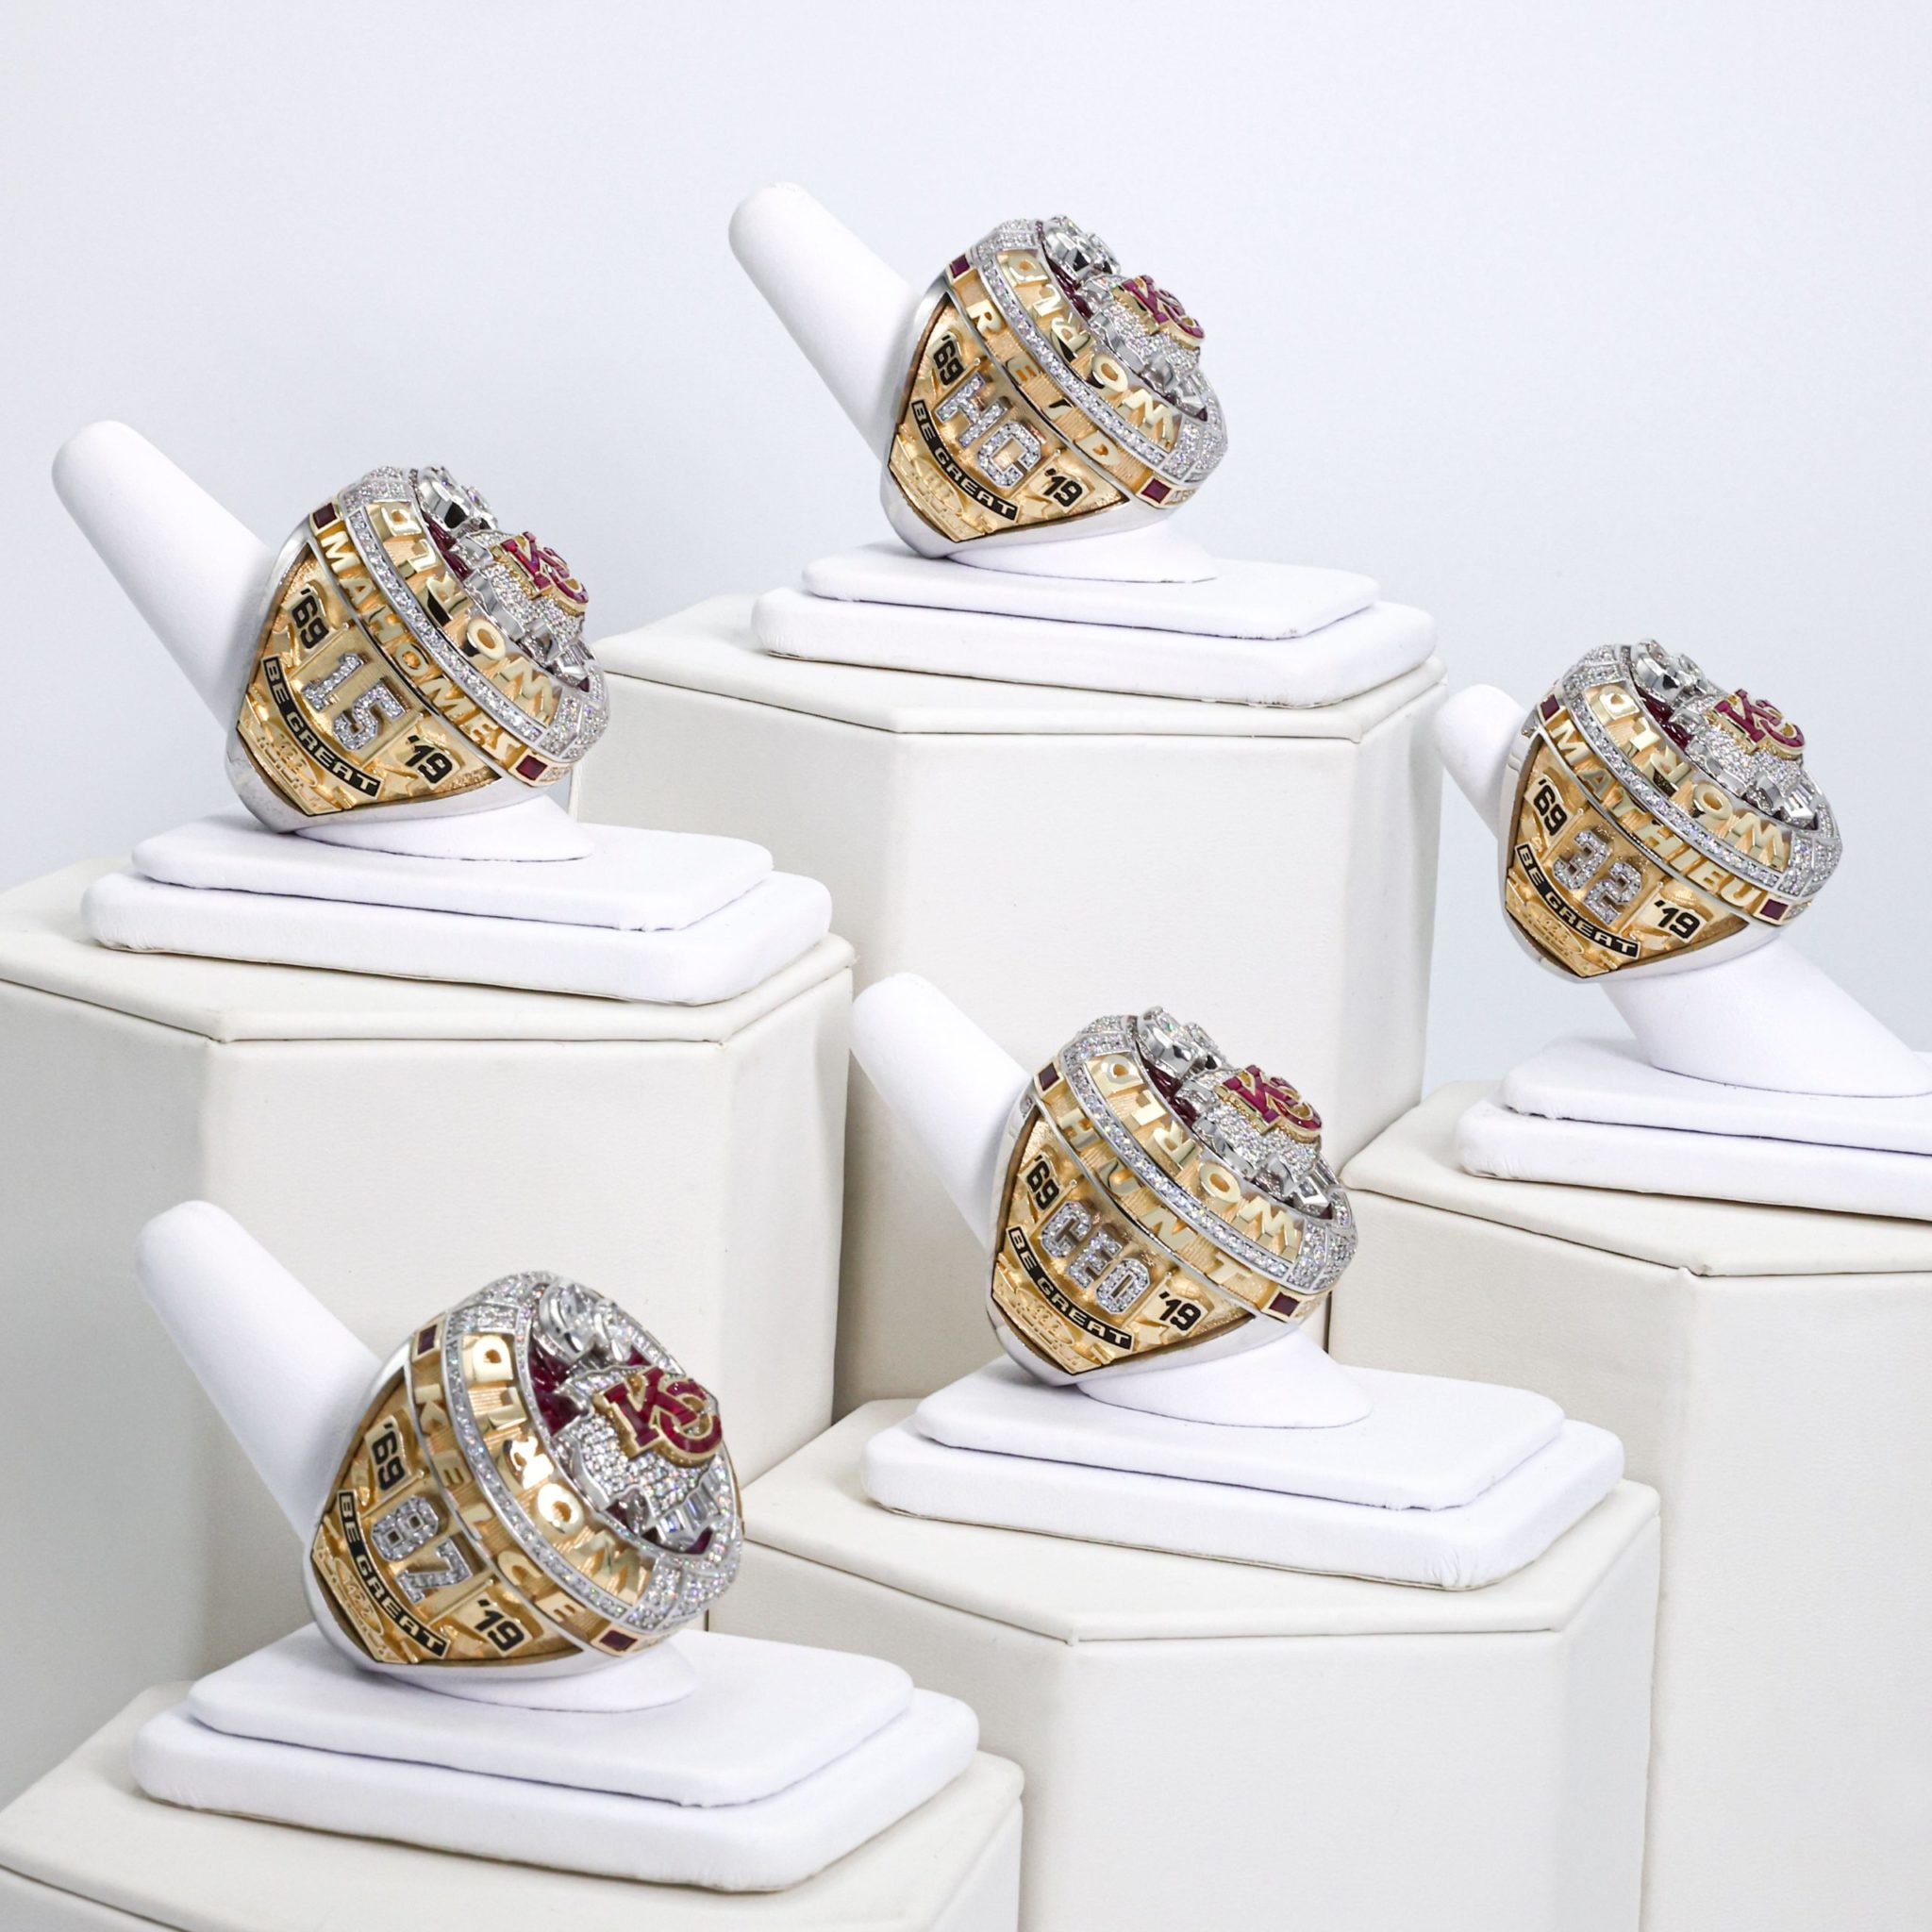 chiefs super bowl ring, large sale Save 88% available - www.zenera.in